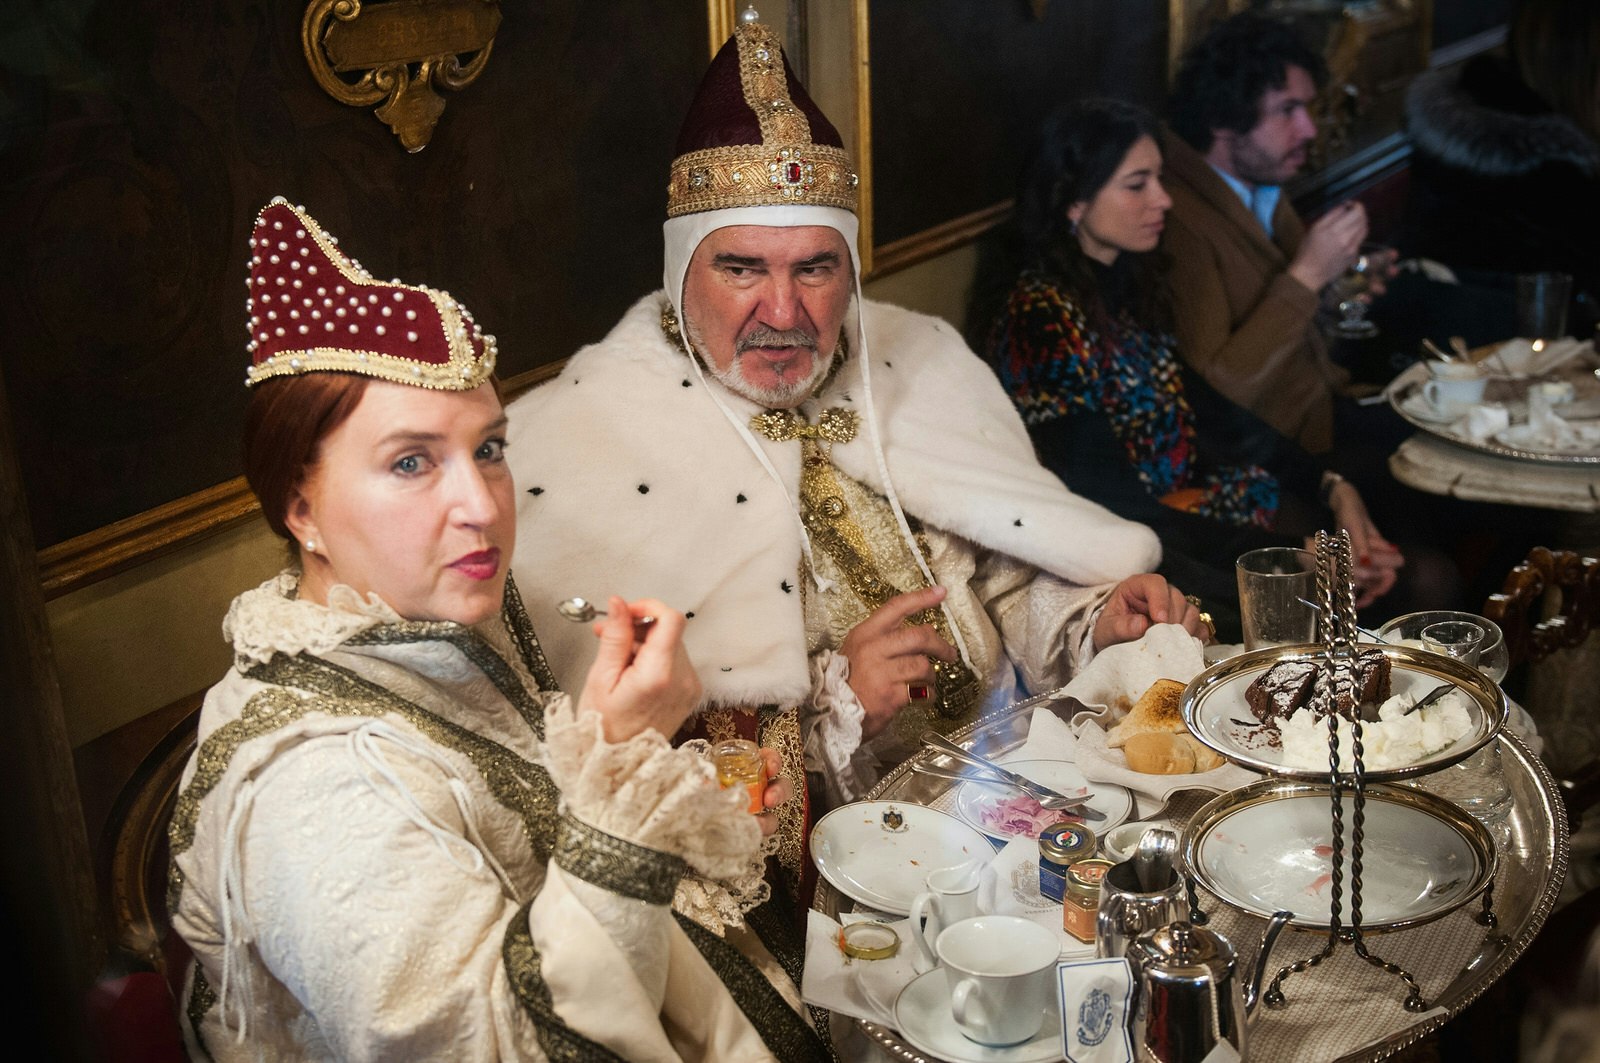 Two diners are dressed as 18th century Venetian royalty while tucking into their high tea.